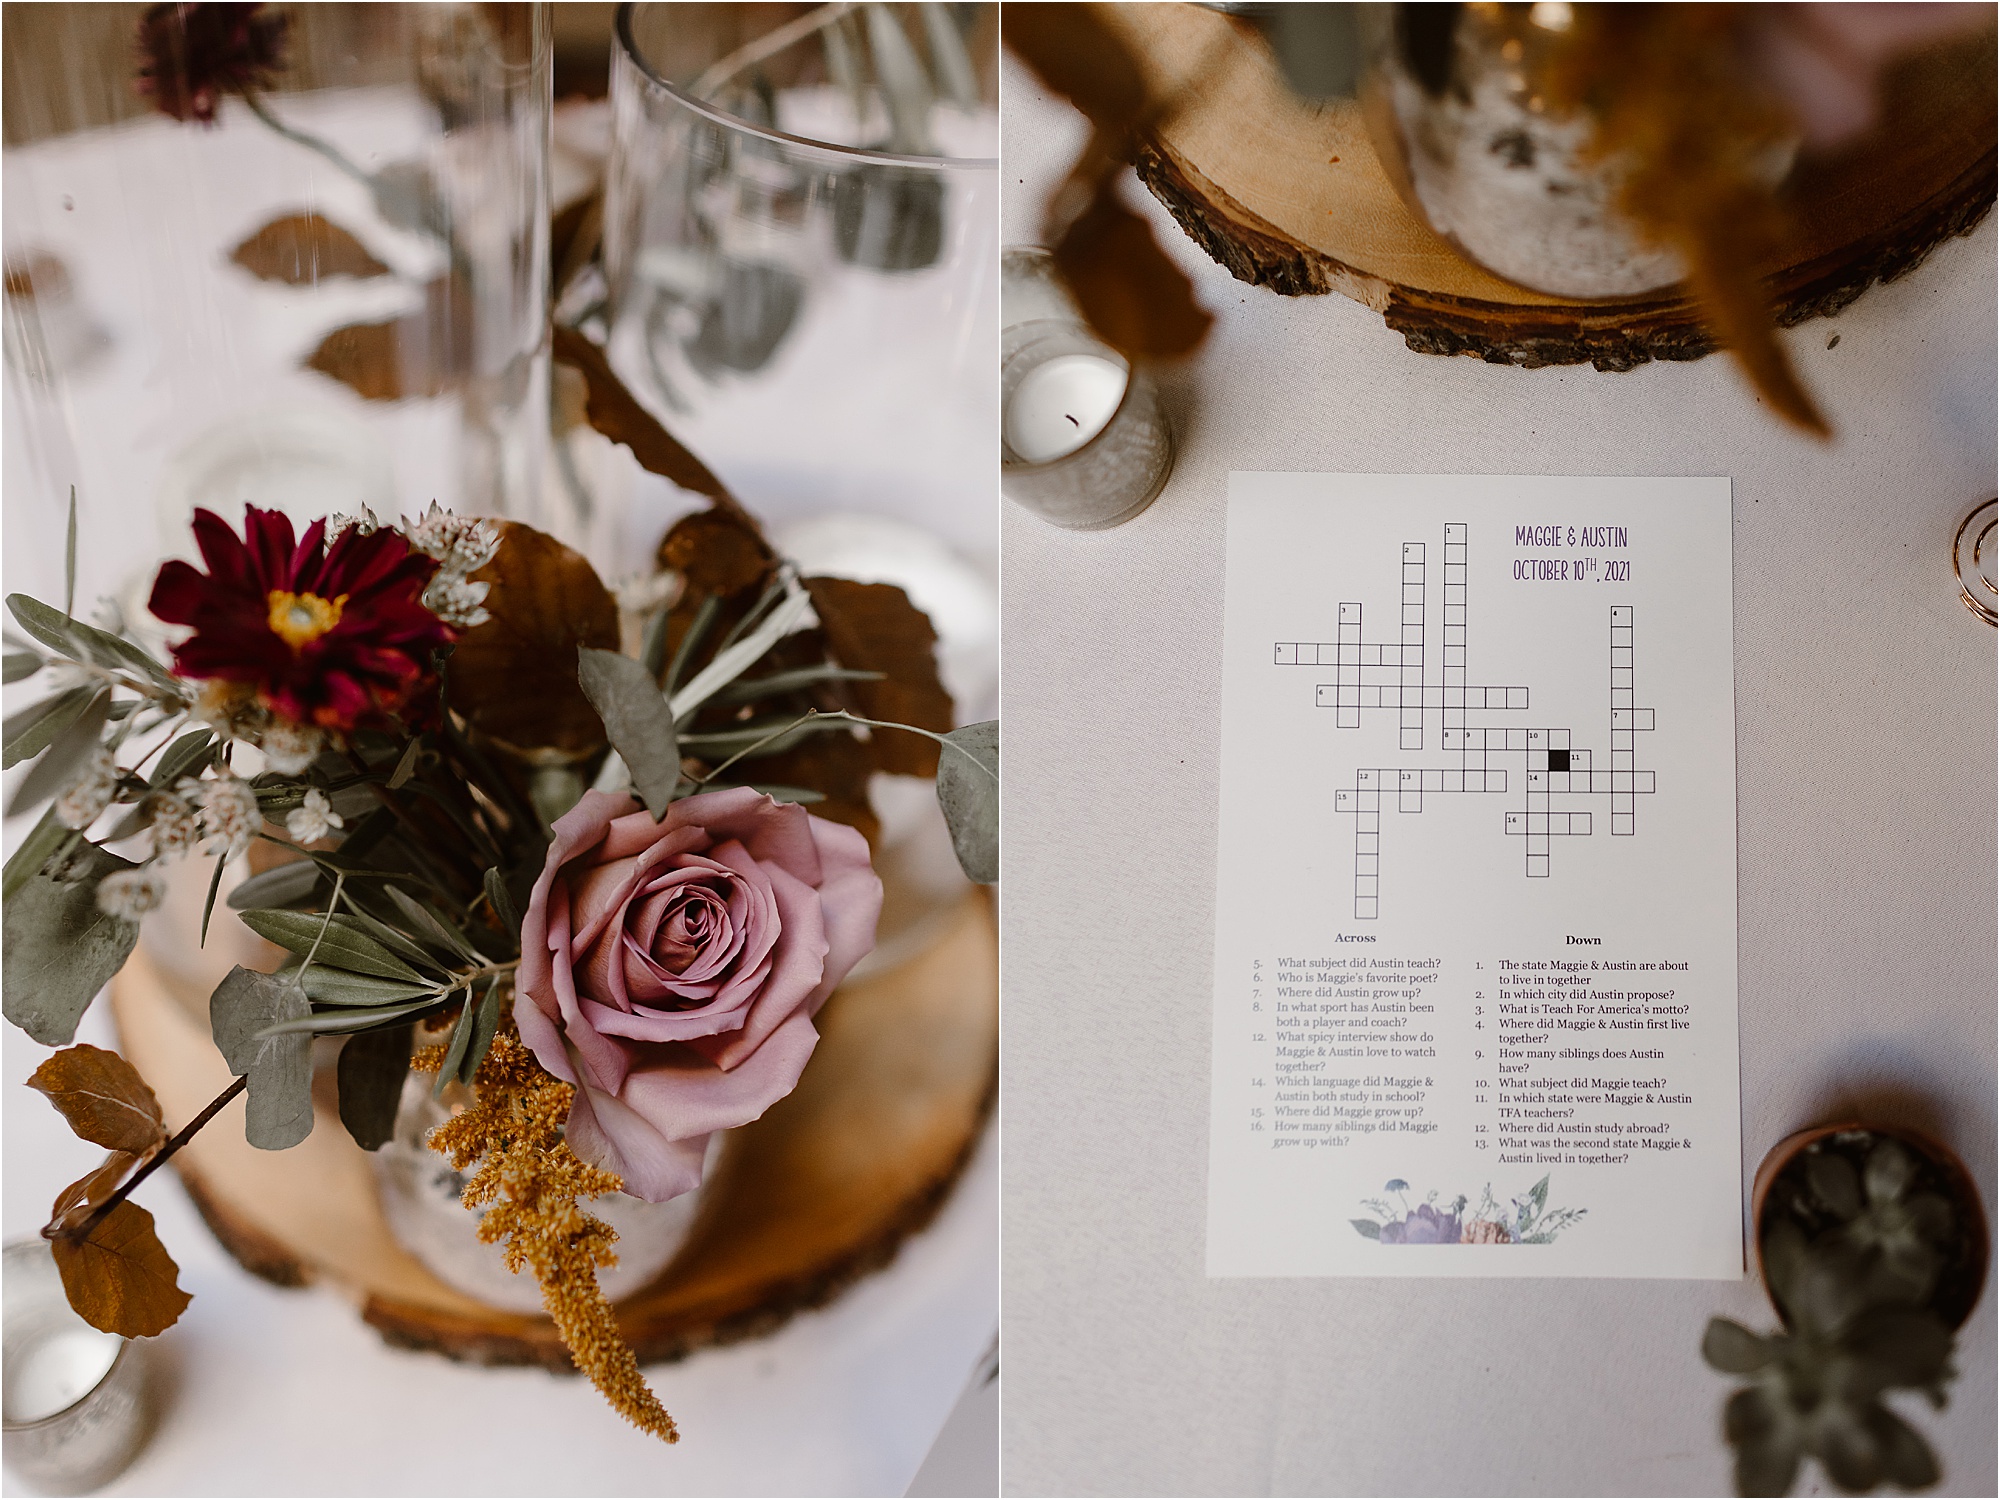 dusty pink rose reception decorations with crossword puzzle game at wedding